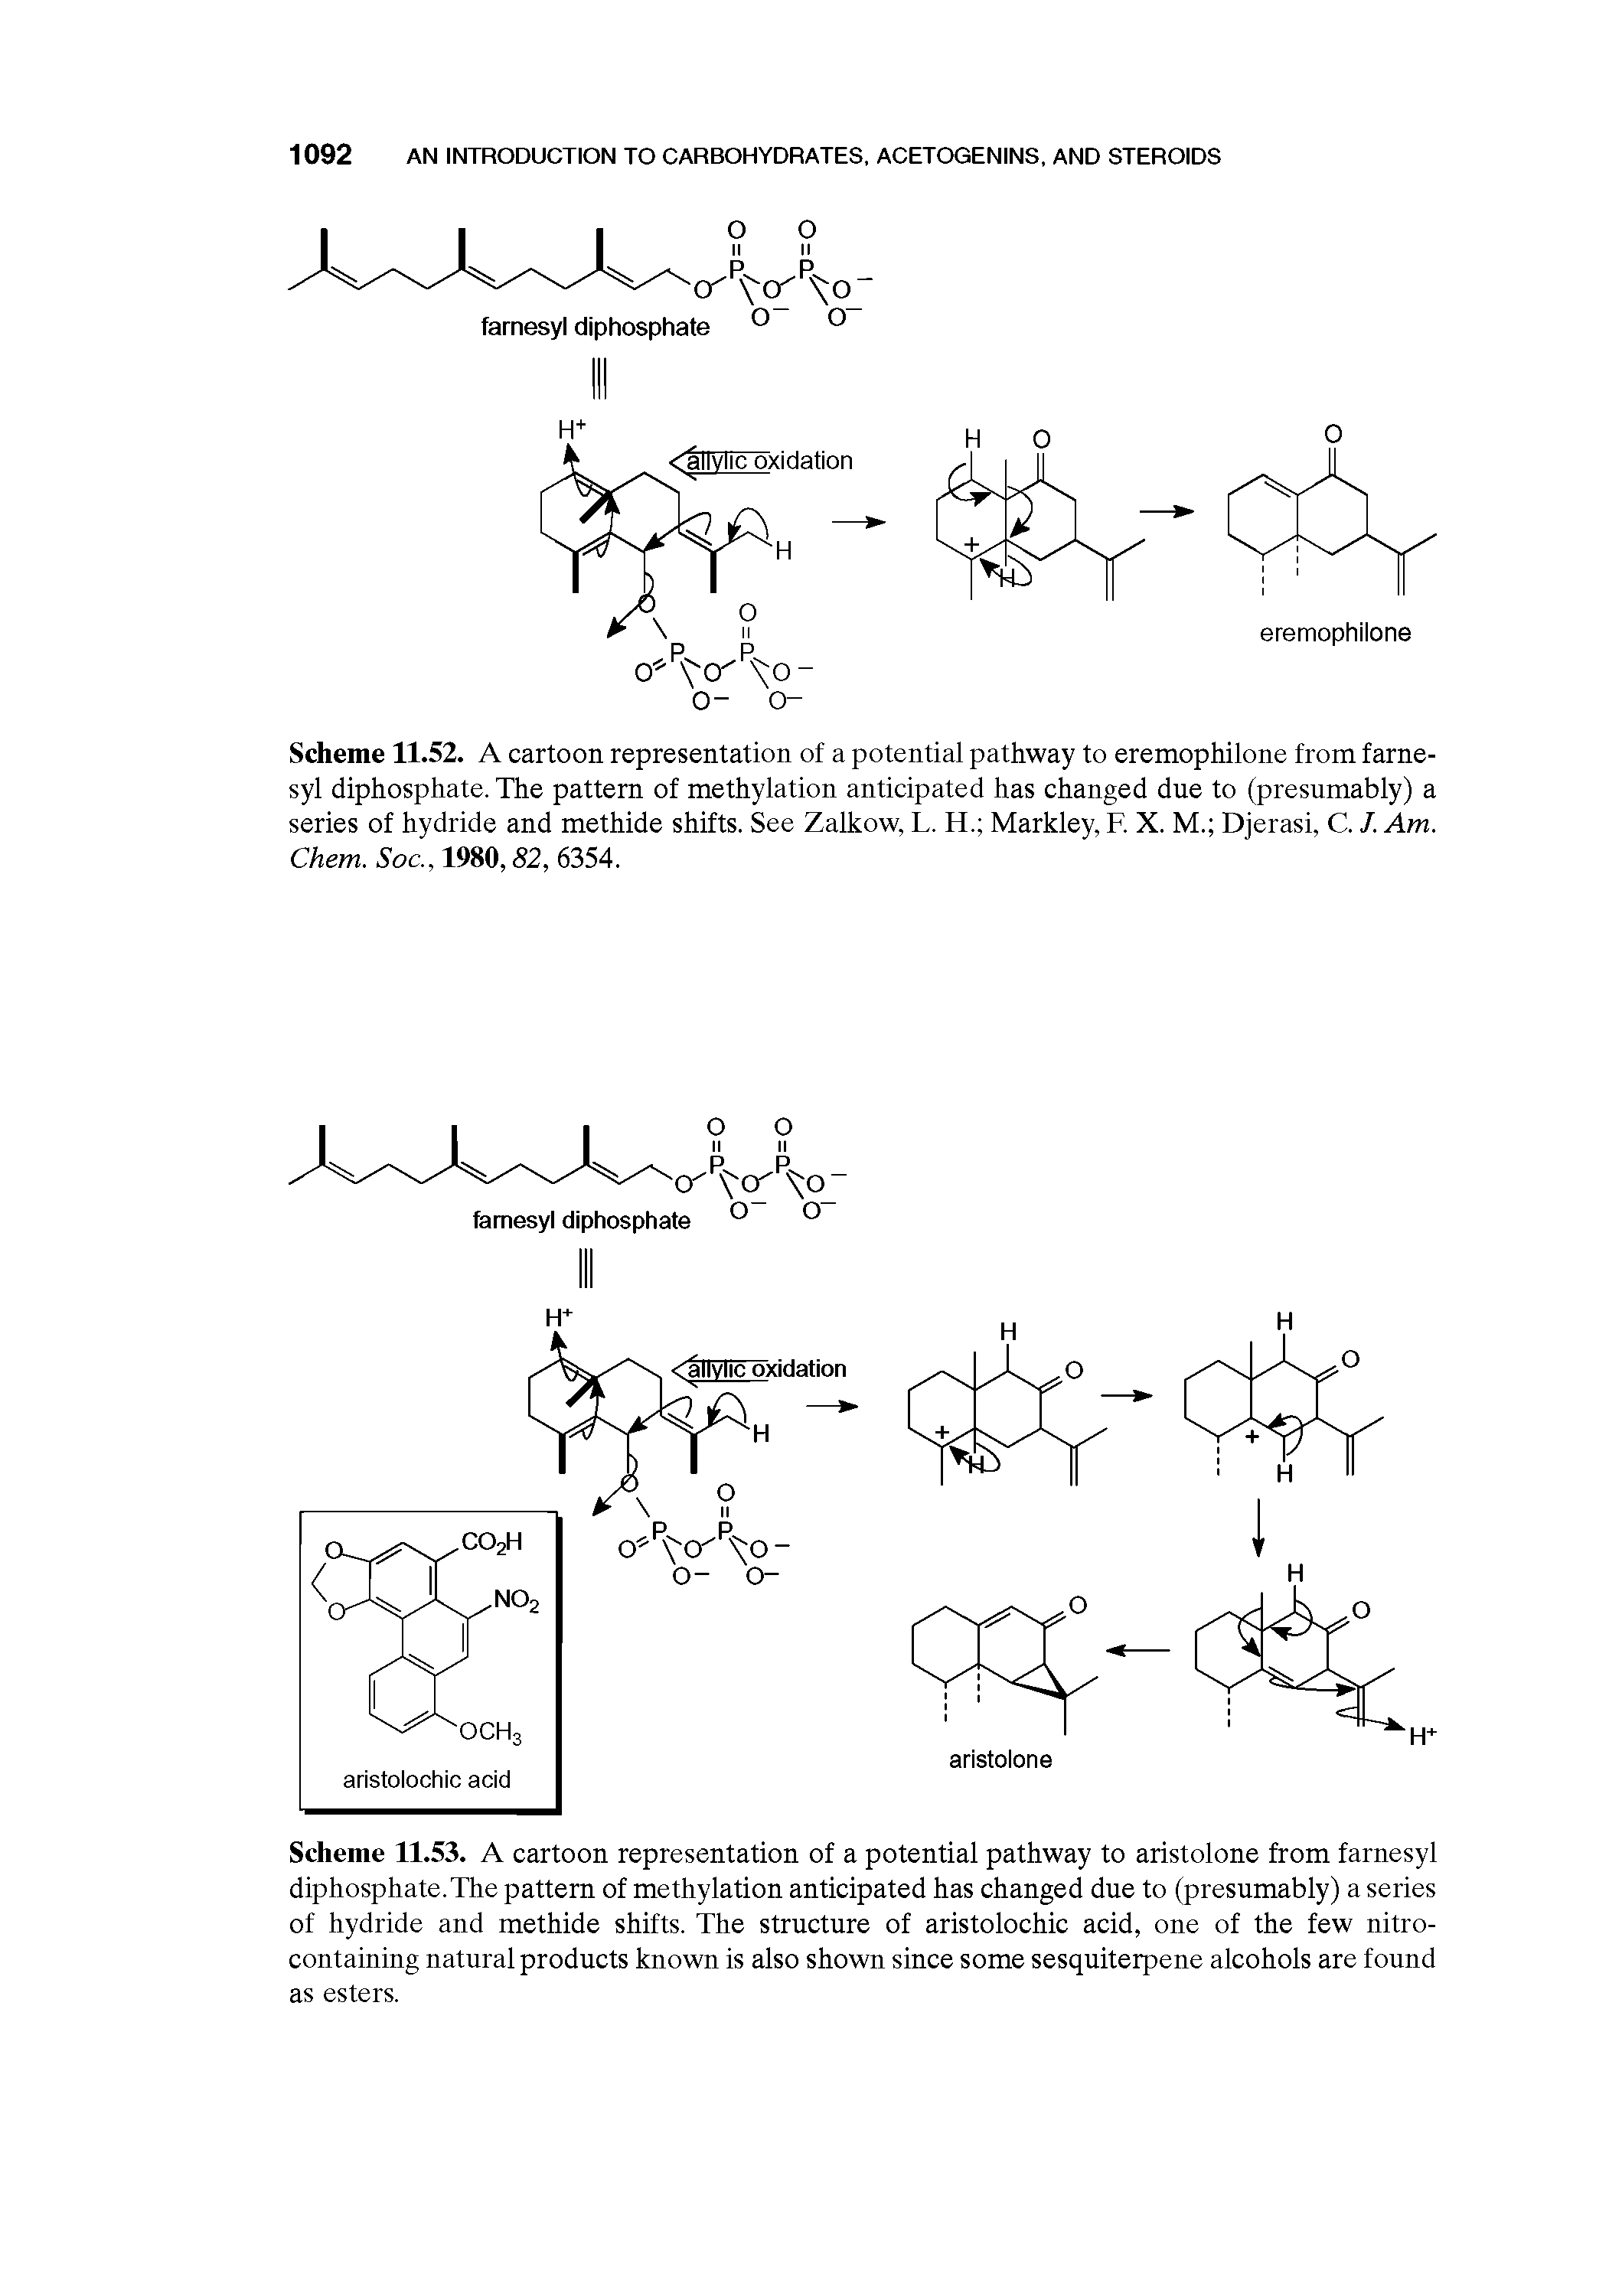 Scheme 11.53. A cartoon representation of a potential pathway to aristolone from farnesyl diphosphate.The pattern of methylation anticipated has changed due to (presumably) a series of hydride and methide shifts. The structure of aristolochic acid, one of the few nitro-containing natural products known is also shown since some sesquiterpene alcohols are found as esters.